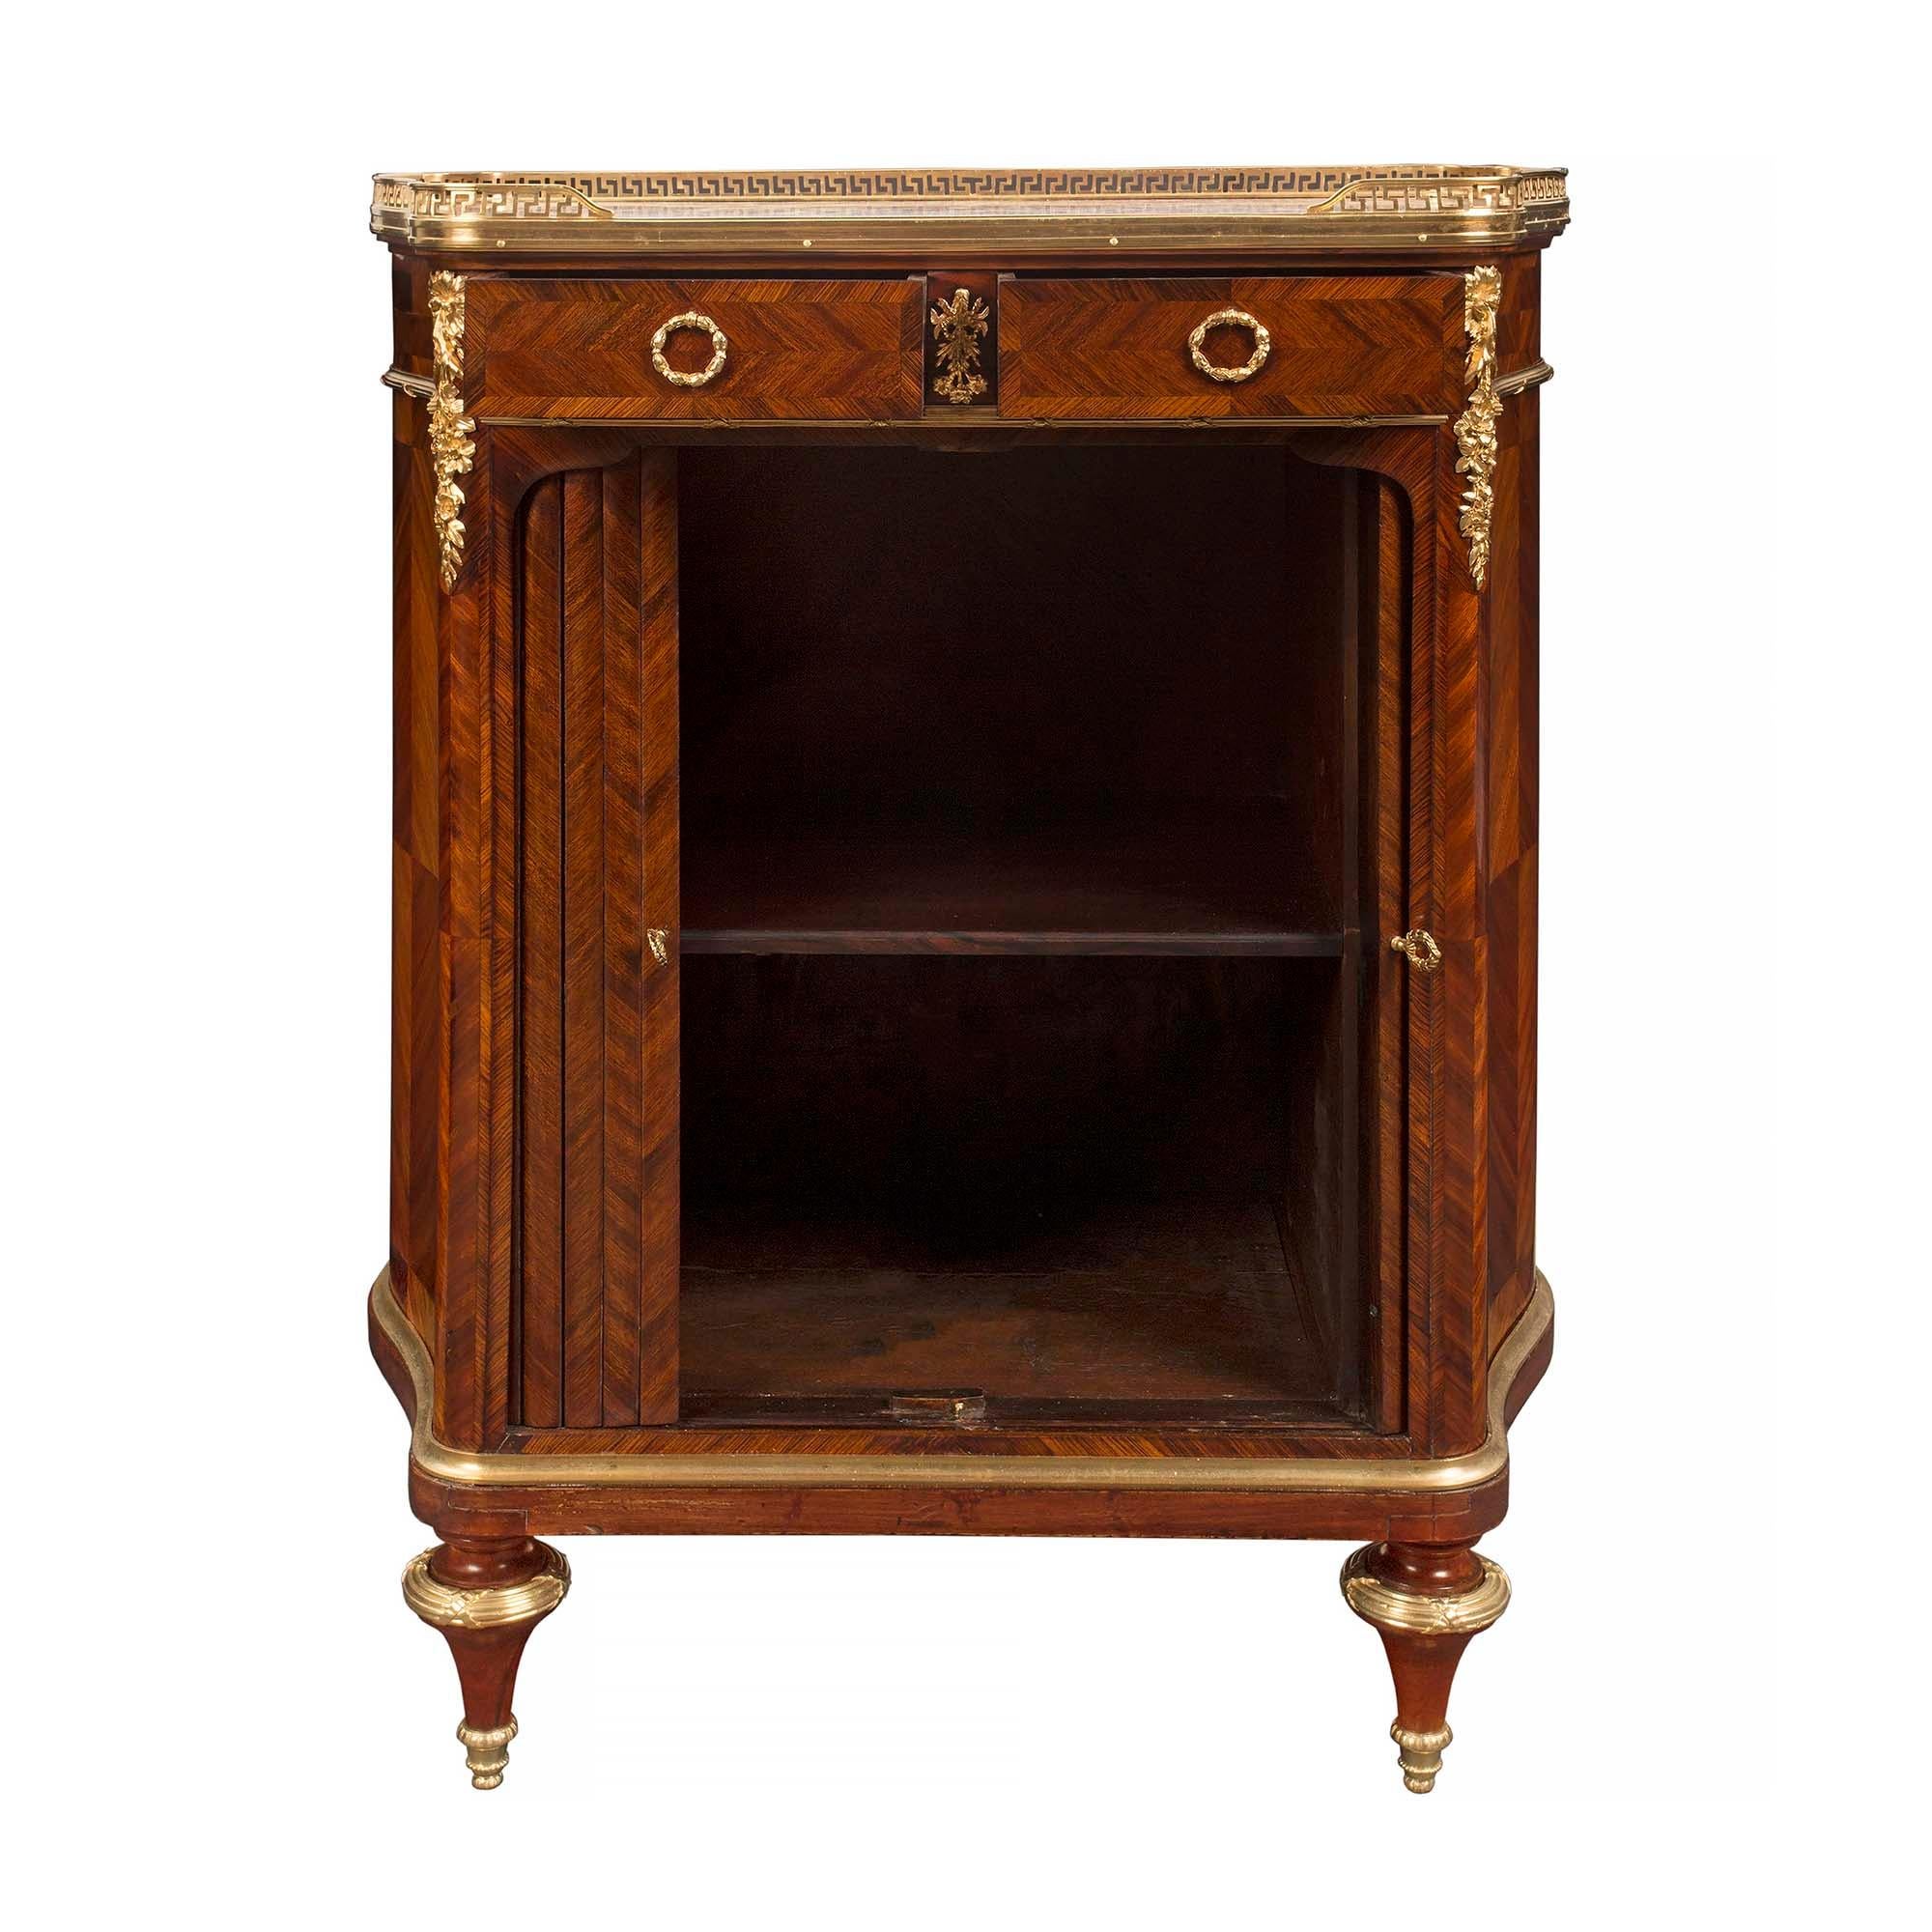  French 19th Century Louis XVI Style Kingwood and Ormolu and Marble Cabinet For Sale 2